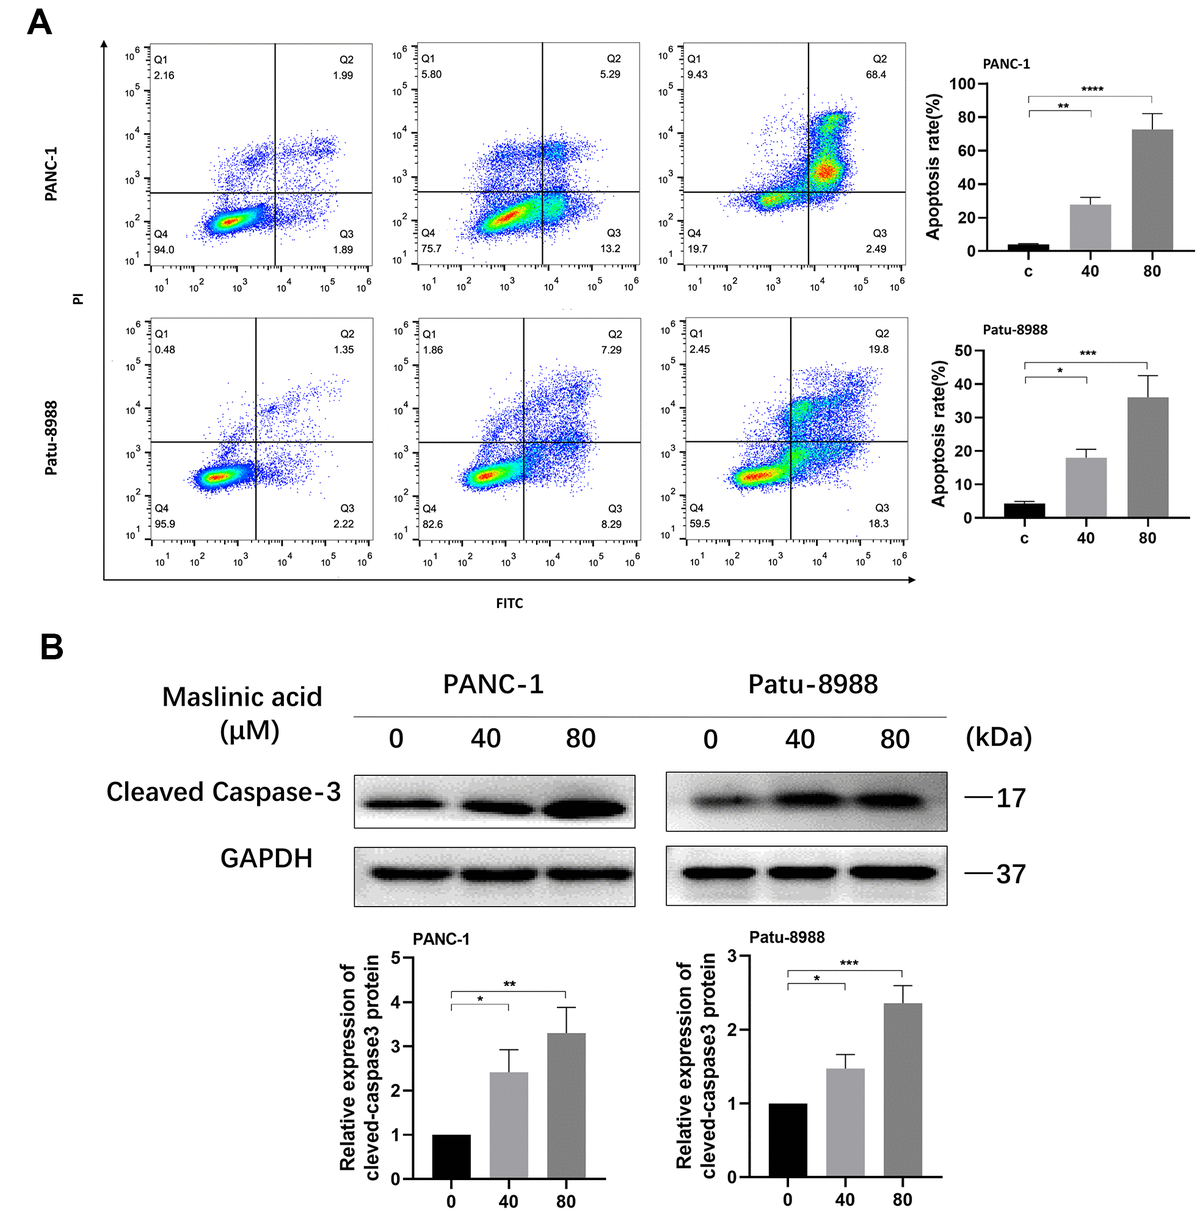 MA-induced apoptosis of pancreatic cancer cells. (A) Flow cytometry detection of the apoptosis of PANC-1 and Patu-8988 cells exposed to MA for 24 h, analyzed by Annexin V/PI staining. (B) Western blot analysis showing the expression of cleaved-caspase3 in MA-treated PANC-1 and Patu-8988 cells. Data are representative of three independents experiments and expressed as mean ± SD. *p 